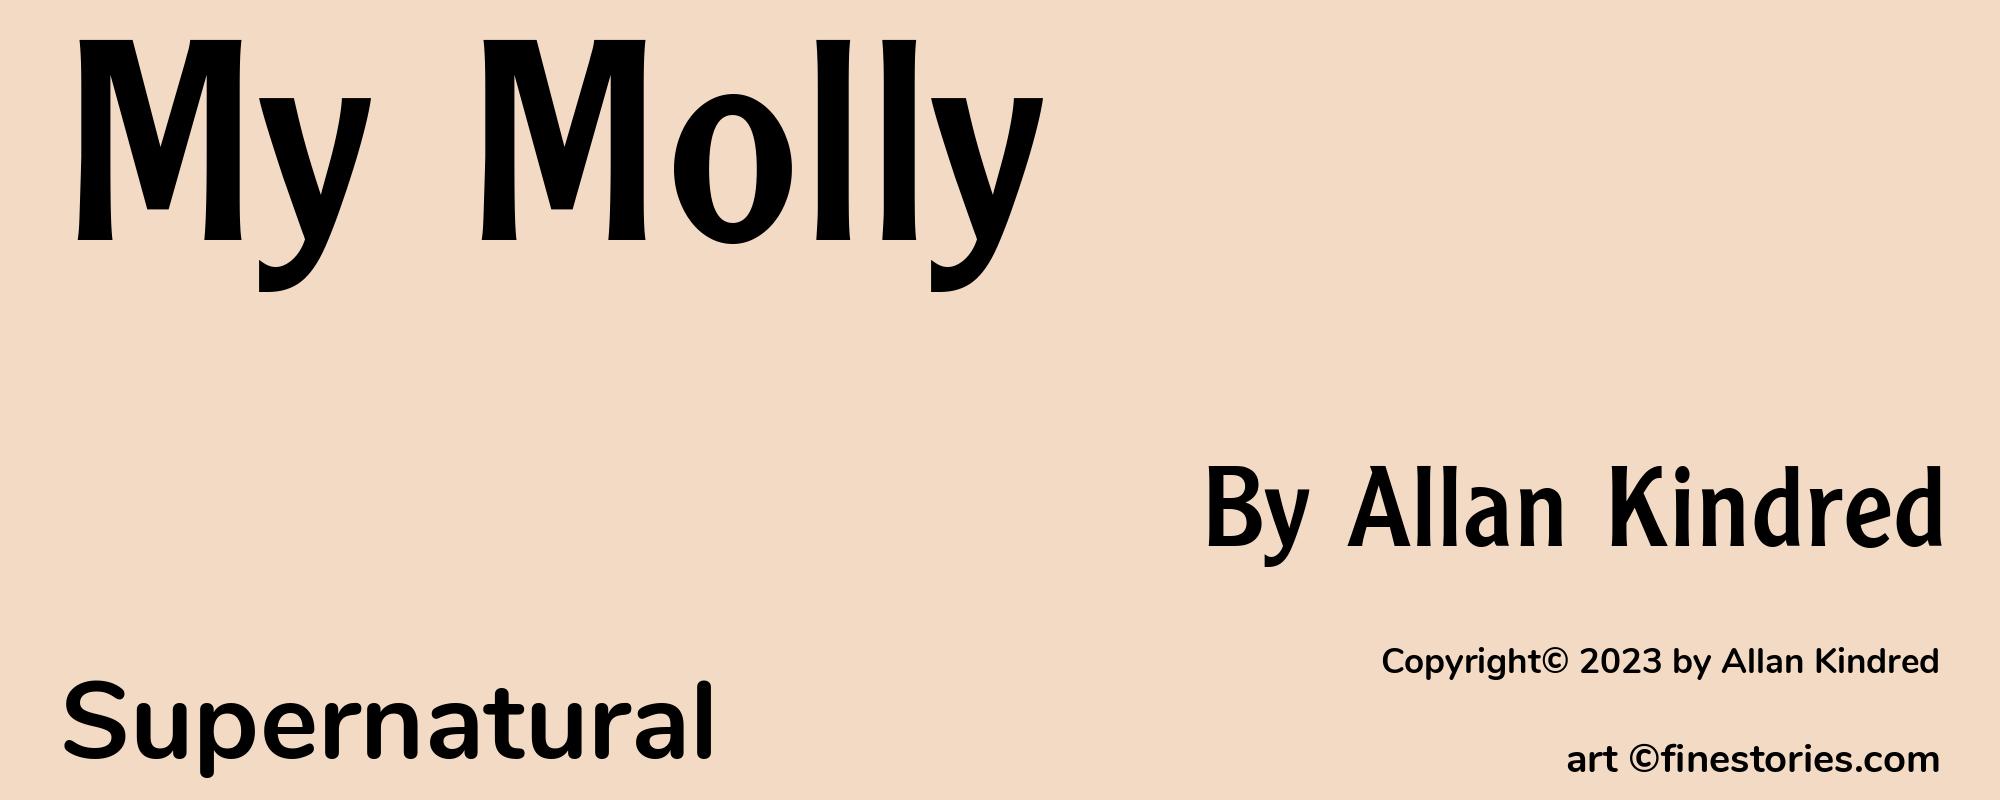 My Molly - Cover